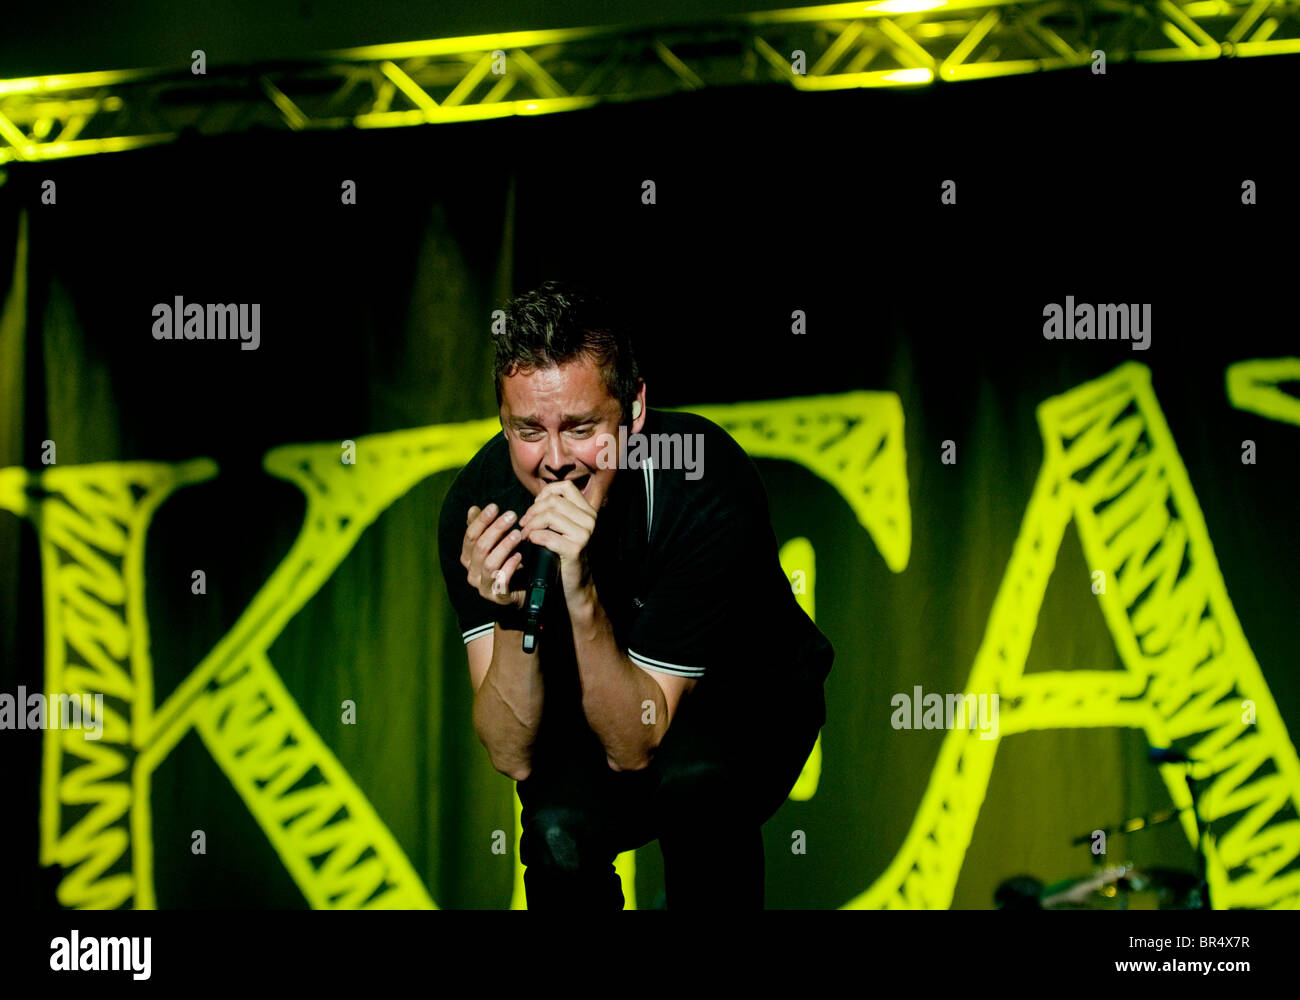 Tom Chaplin, vocalist with British alternative rock band Keane, performing on stage Stock Photo